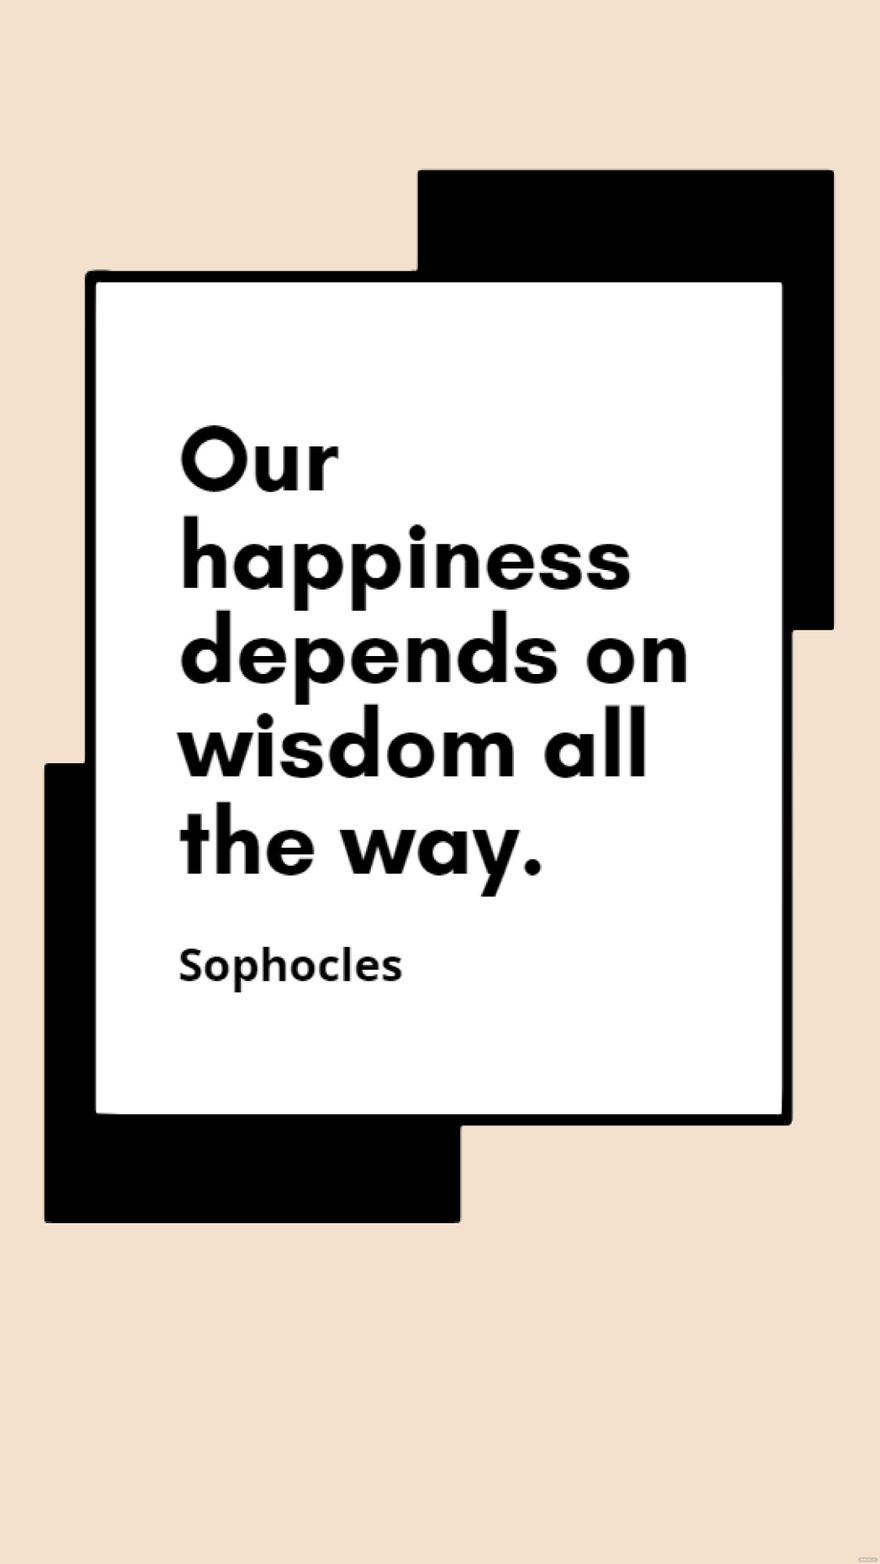 Sophocles - Our happiness depends on wisdom all the way.